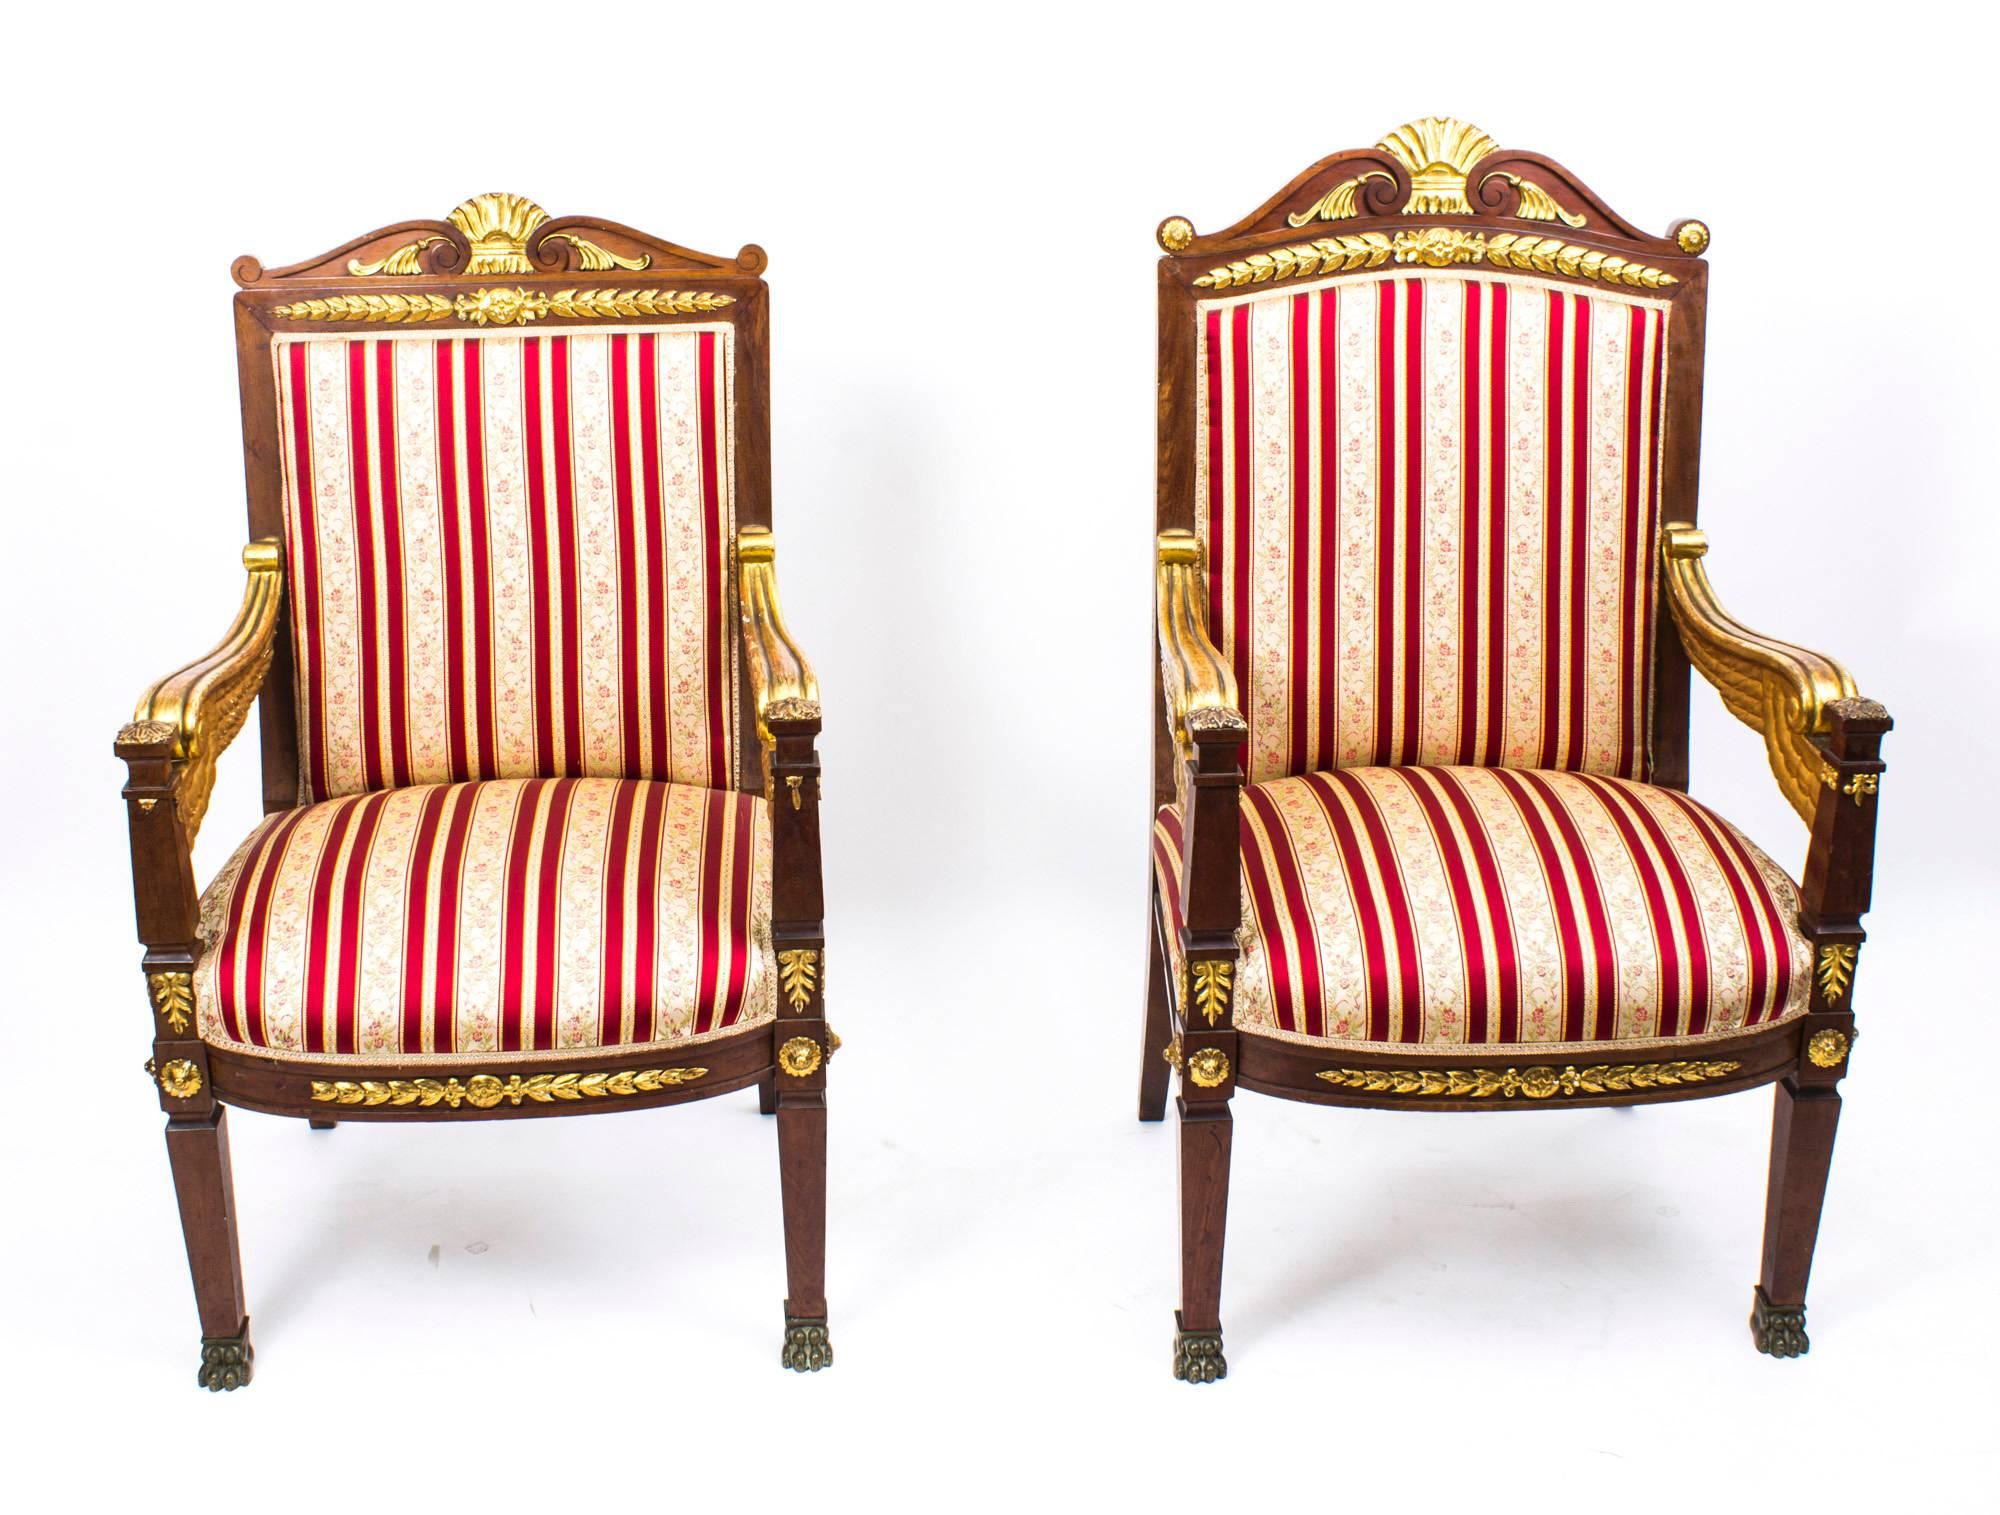 This is a fine companion pair of hand carved and gilded Napoleon III solid mahogany French Empire armchairs, circa 1870 in date.

These rare ladies and gents companion chair, feature stepped block front legs which terminate in ormolu lion's paw